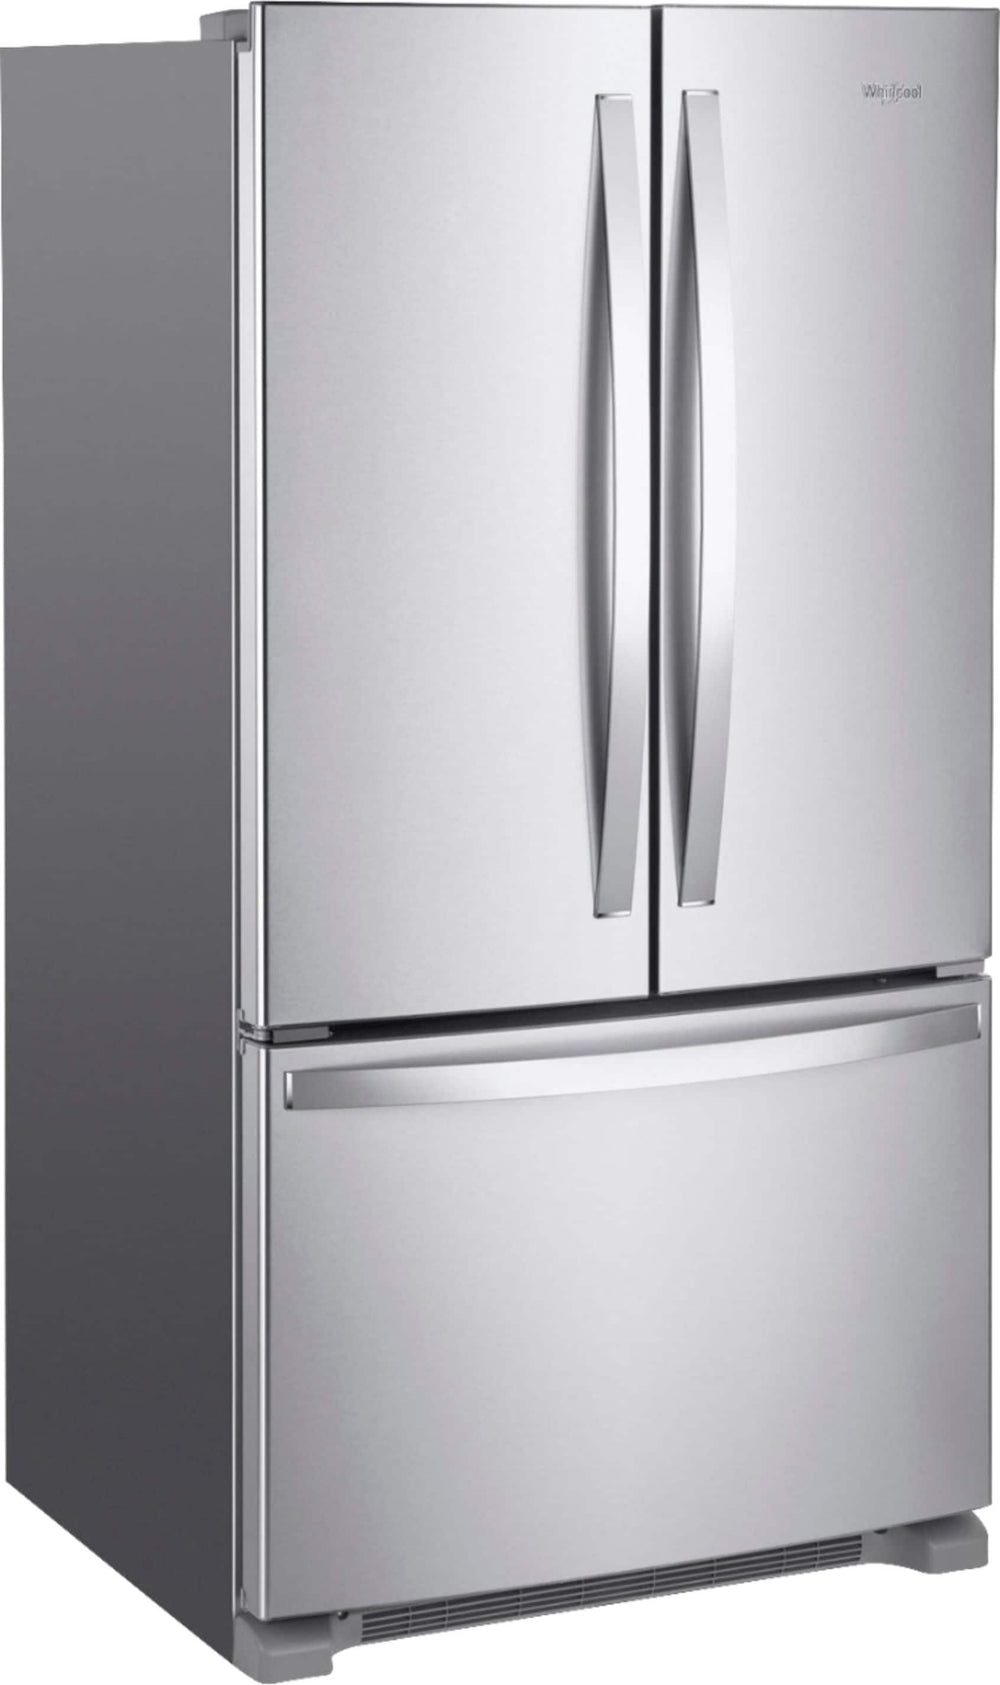 Whirlpool - 25.2 Cu. Ft. French Door Refrigerator with Internal Water Dispenser - Stainless steel_1